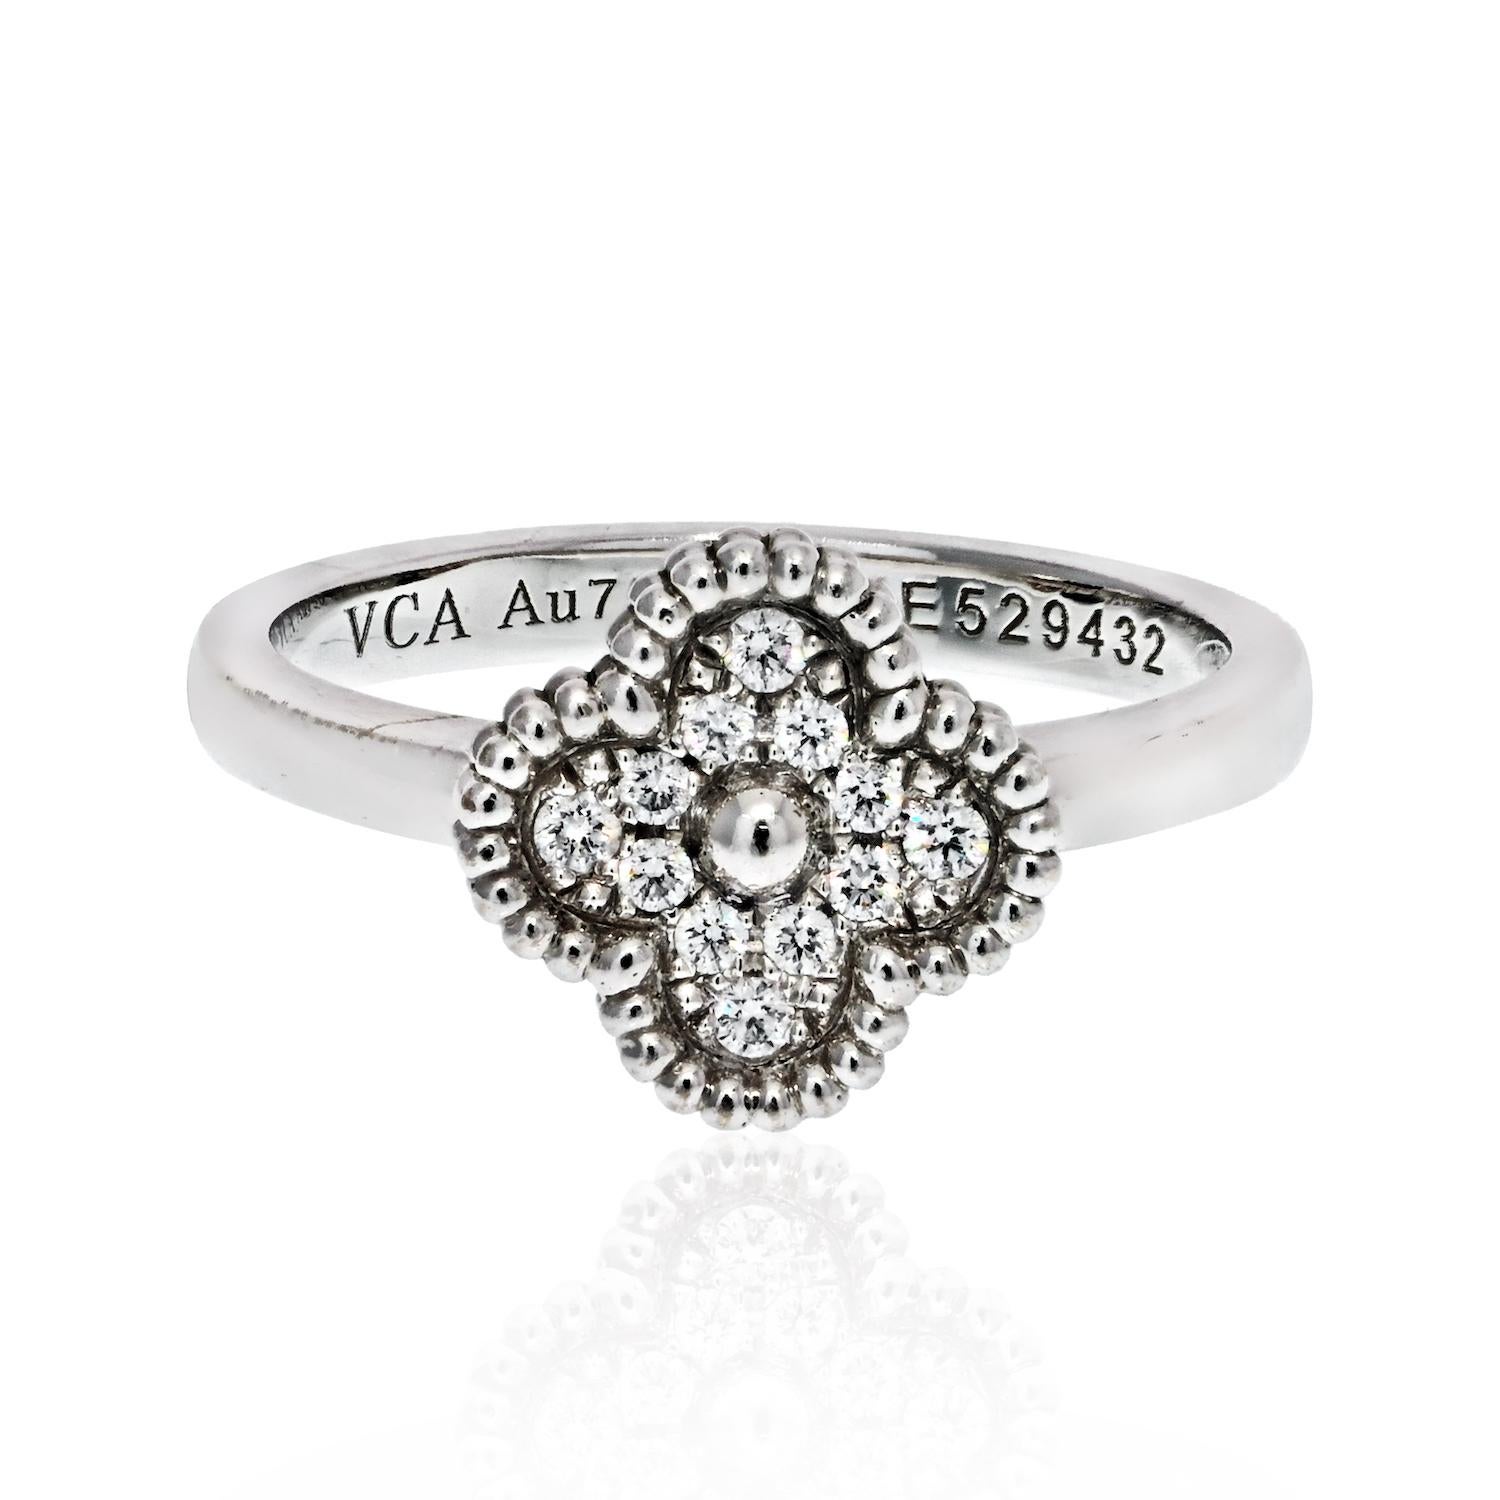 Van Cleef & Arpels 18K White Gold Sweet Alhambra Diamond Mini Ring.
Size 47. American 4.
With VCA Certificate.
Perfect as a pinky.